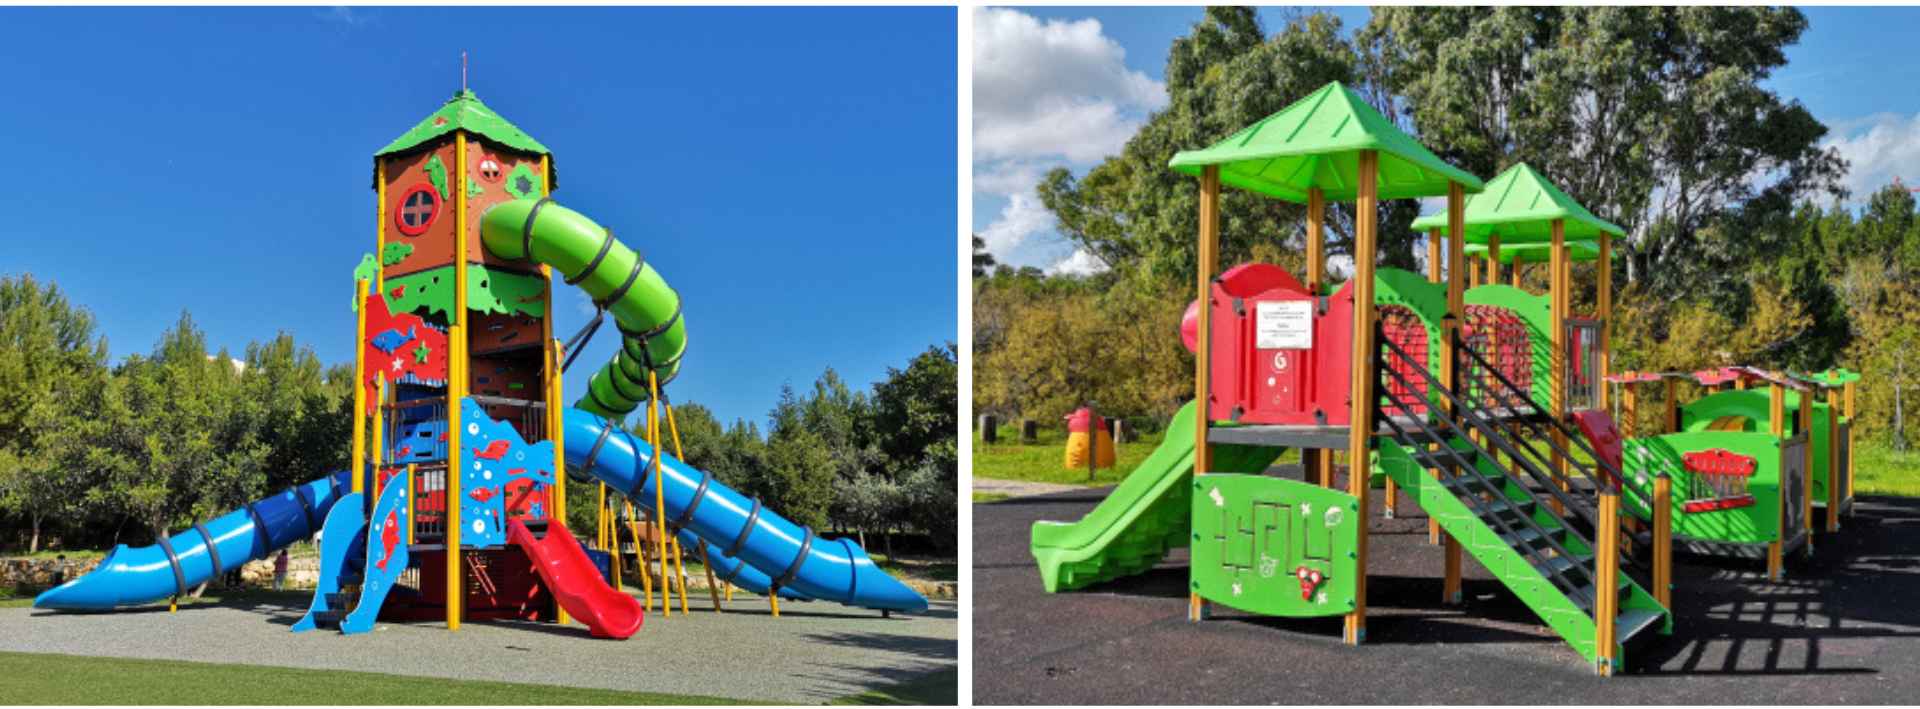 two kids' playhouses in a playground